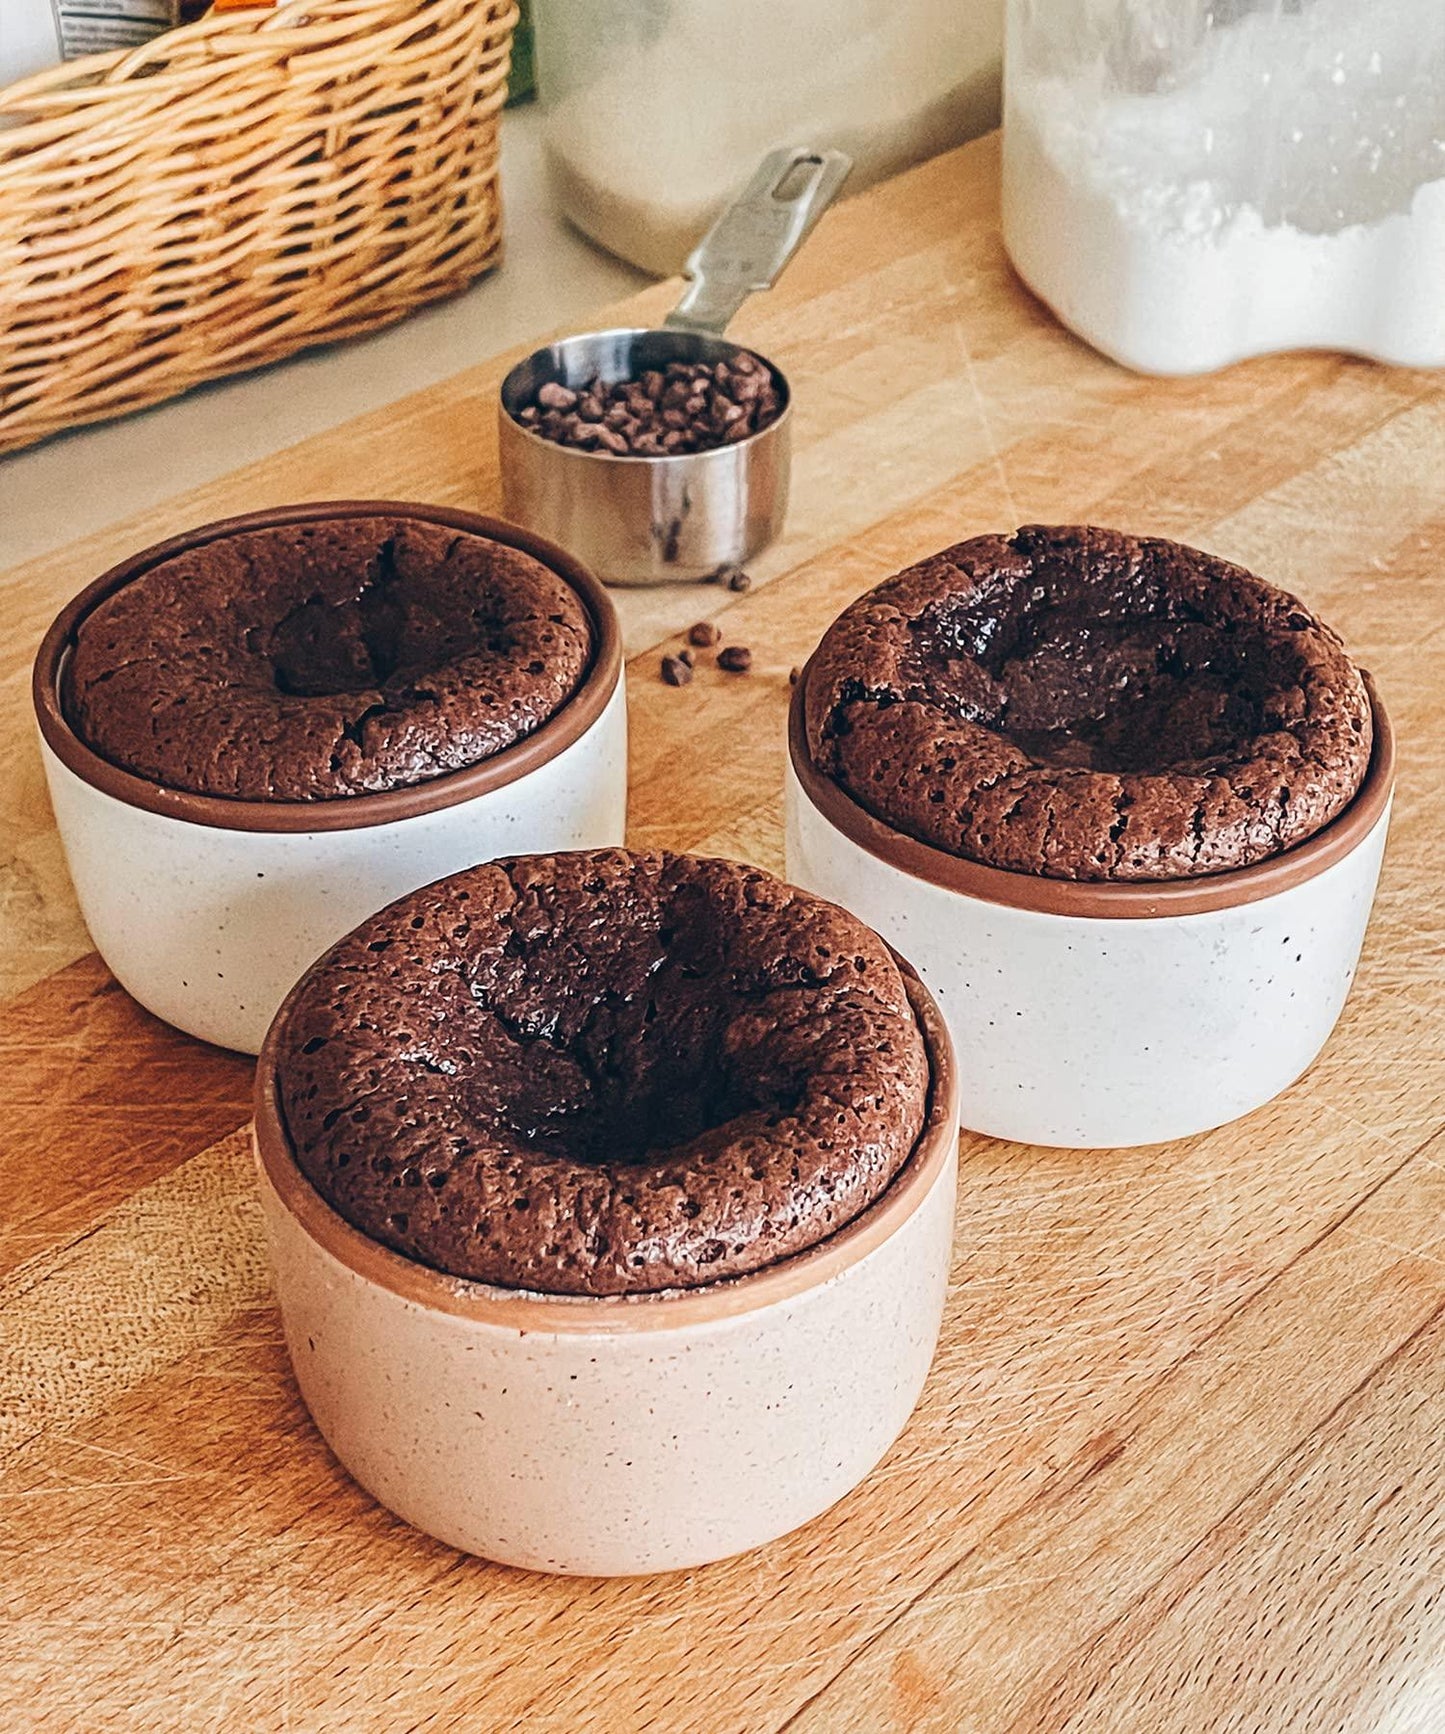 Mora Ceramic Ramekins - 8oz, Set of 6 - Small Oven Safe Baking Dishes/Cups - For Personal Pudding, Creme Brulee, Souffle, Serving Dip, Custard, Ice Cream - Single Mini Bowls - Assorted Neutrals - CookCave